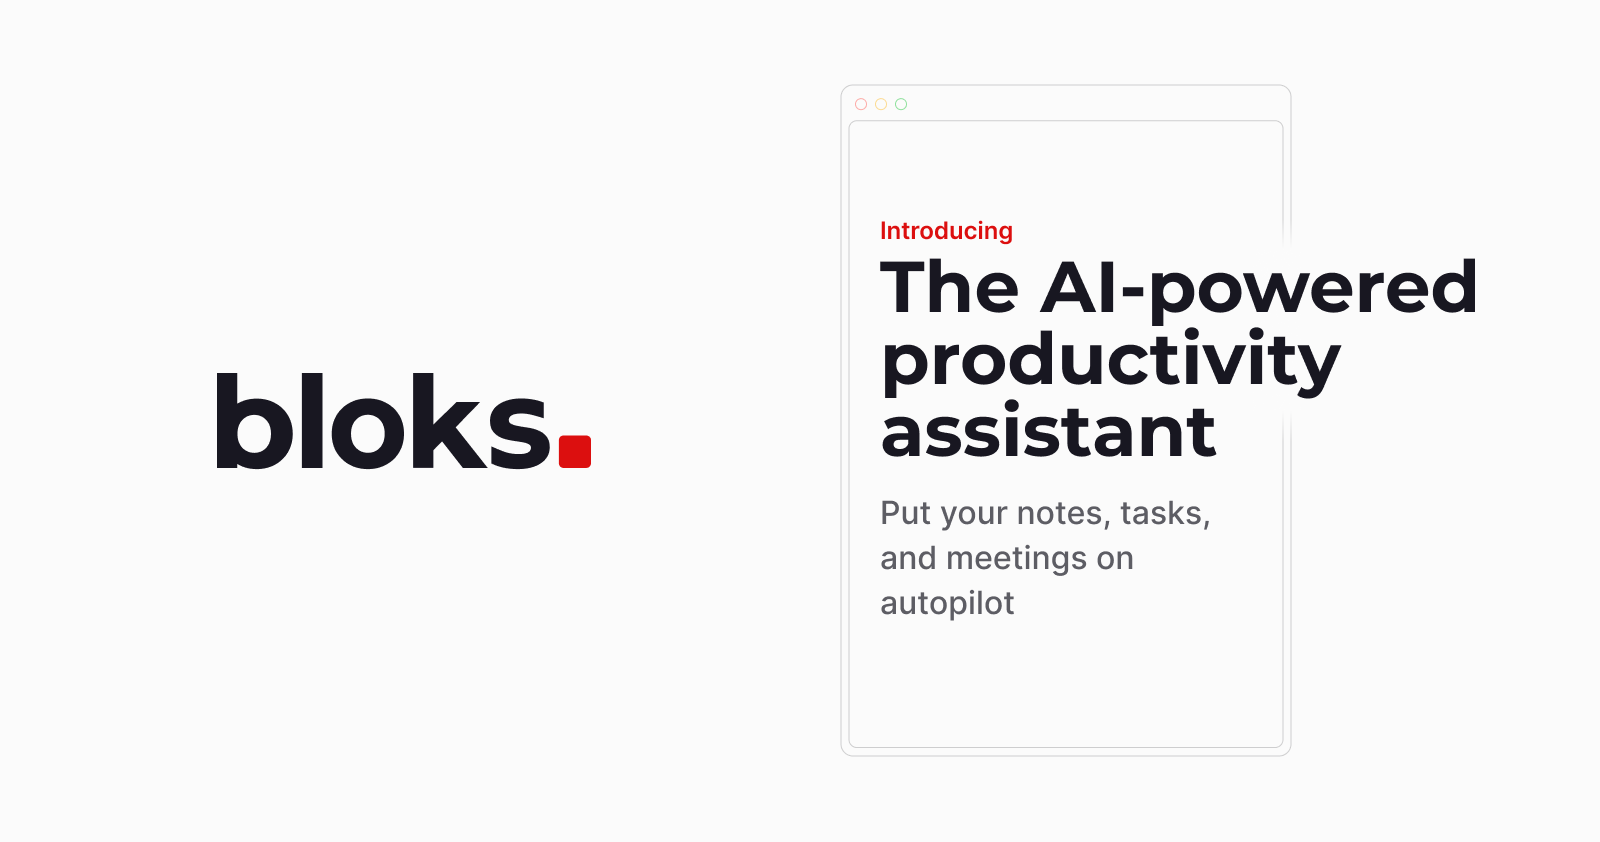 Bloks - A tool to organize notes, tasks, and meetings